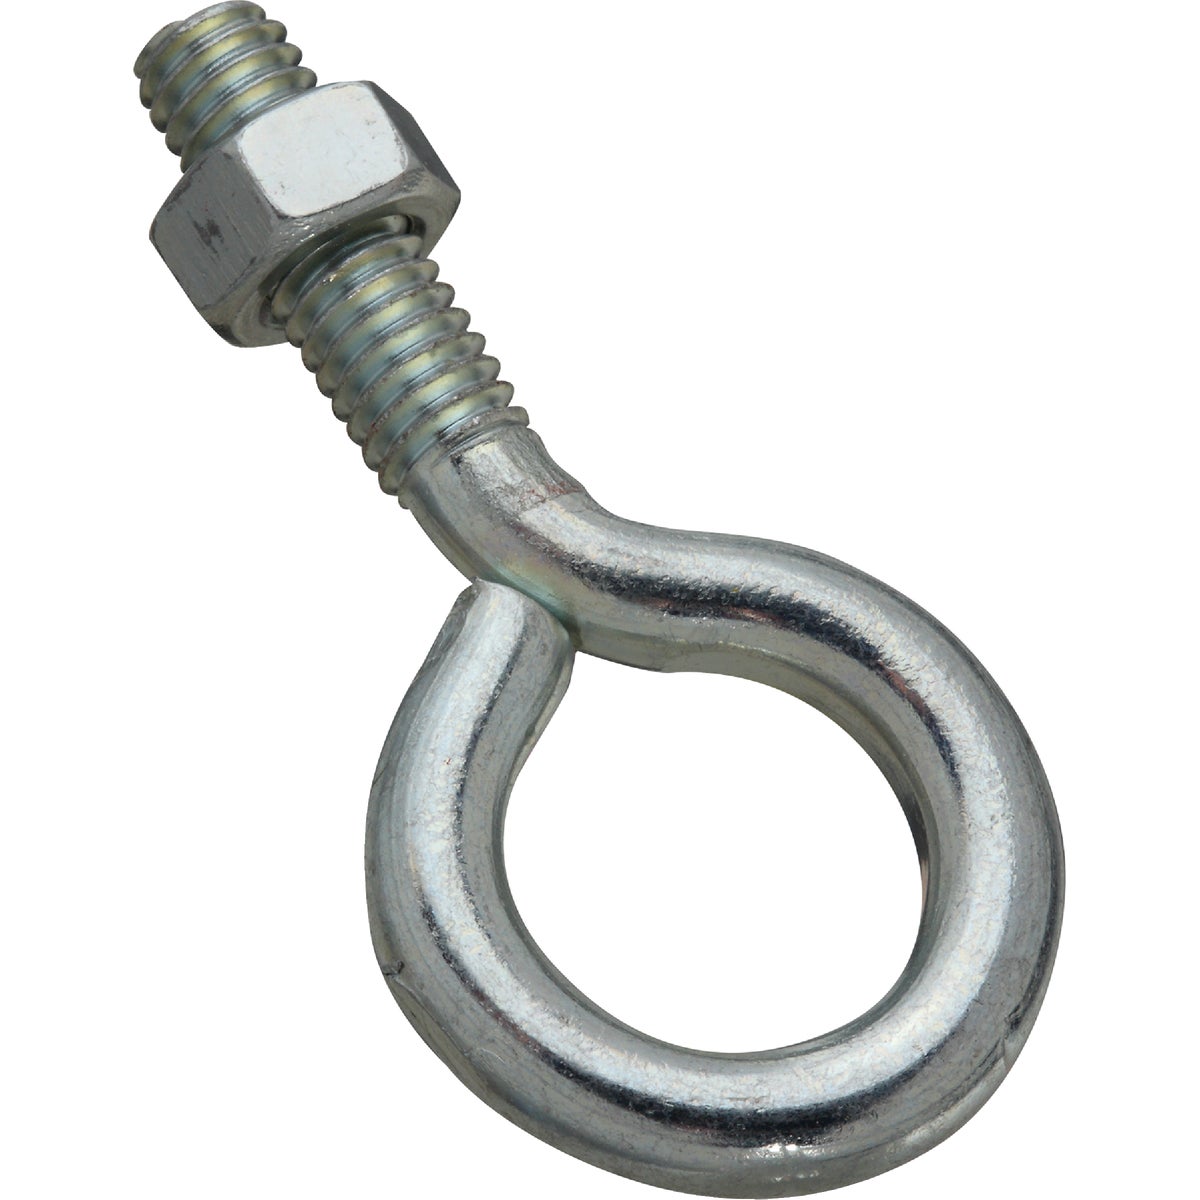 National 5/16 In. x 2-1/2 In. Zinc Eye Bolt with Hex Nut